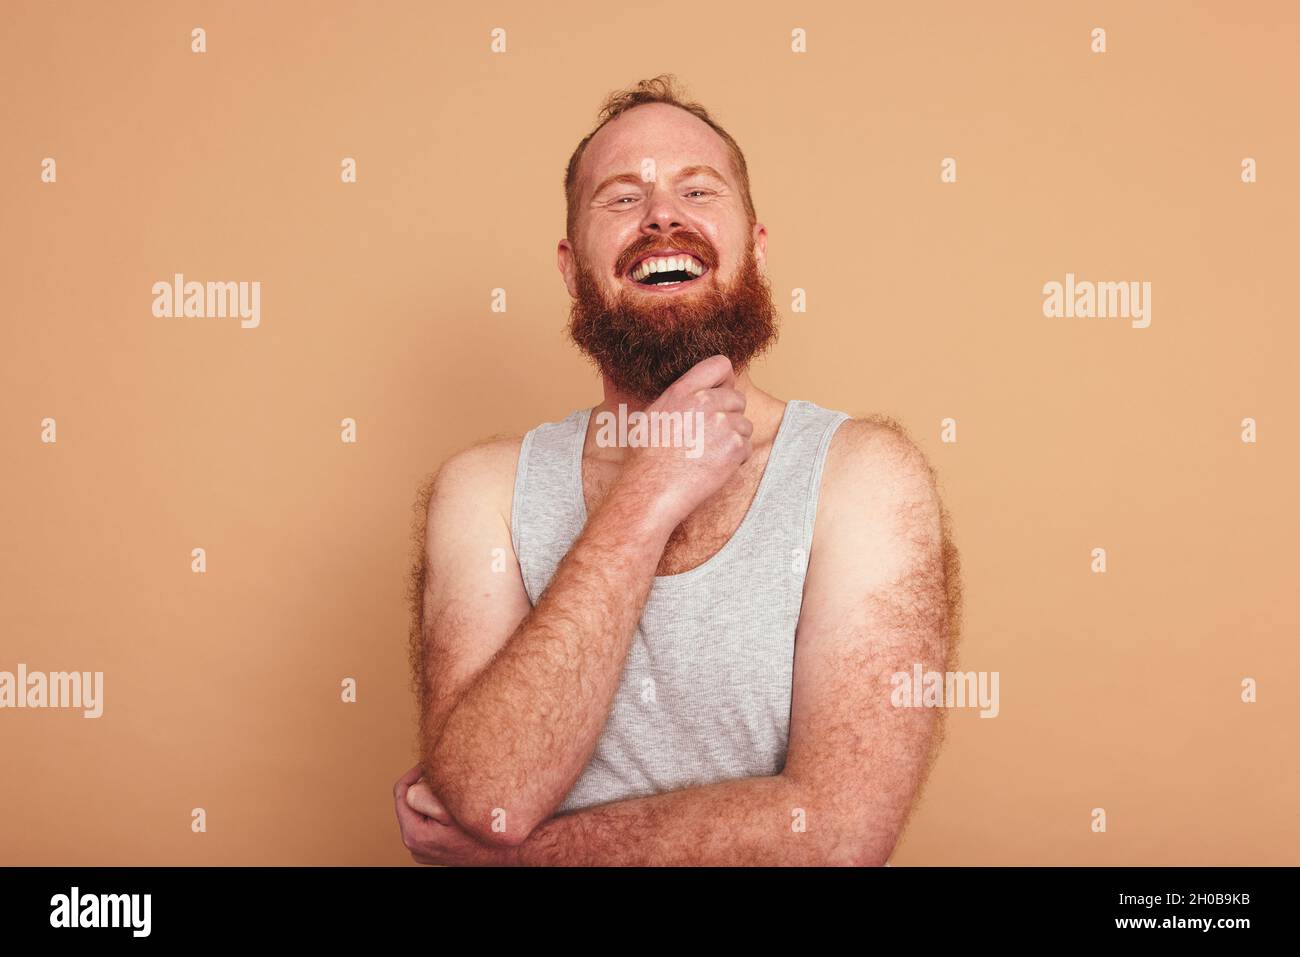 Cheerful man smiling at the camera in a studio. Body positive young man standing against a studio background. Self-assured young man feeling comfortab Stock Photo